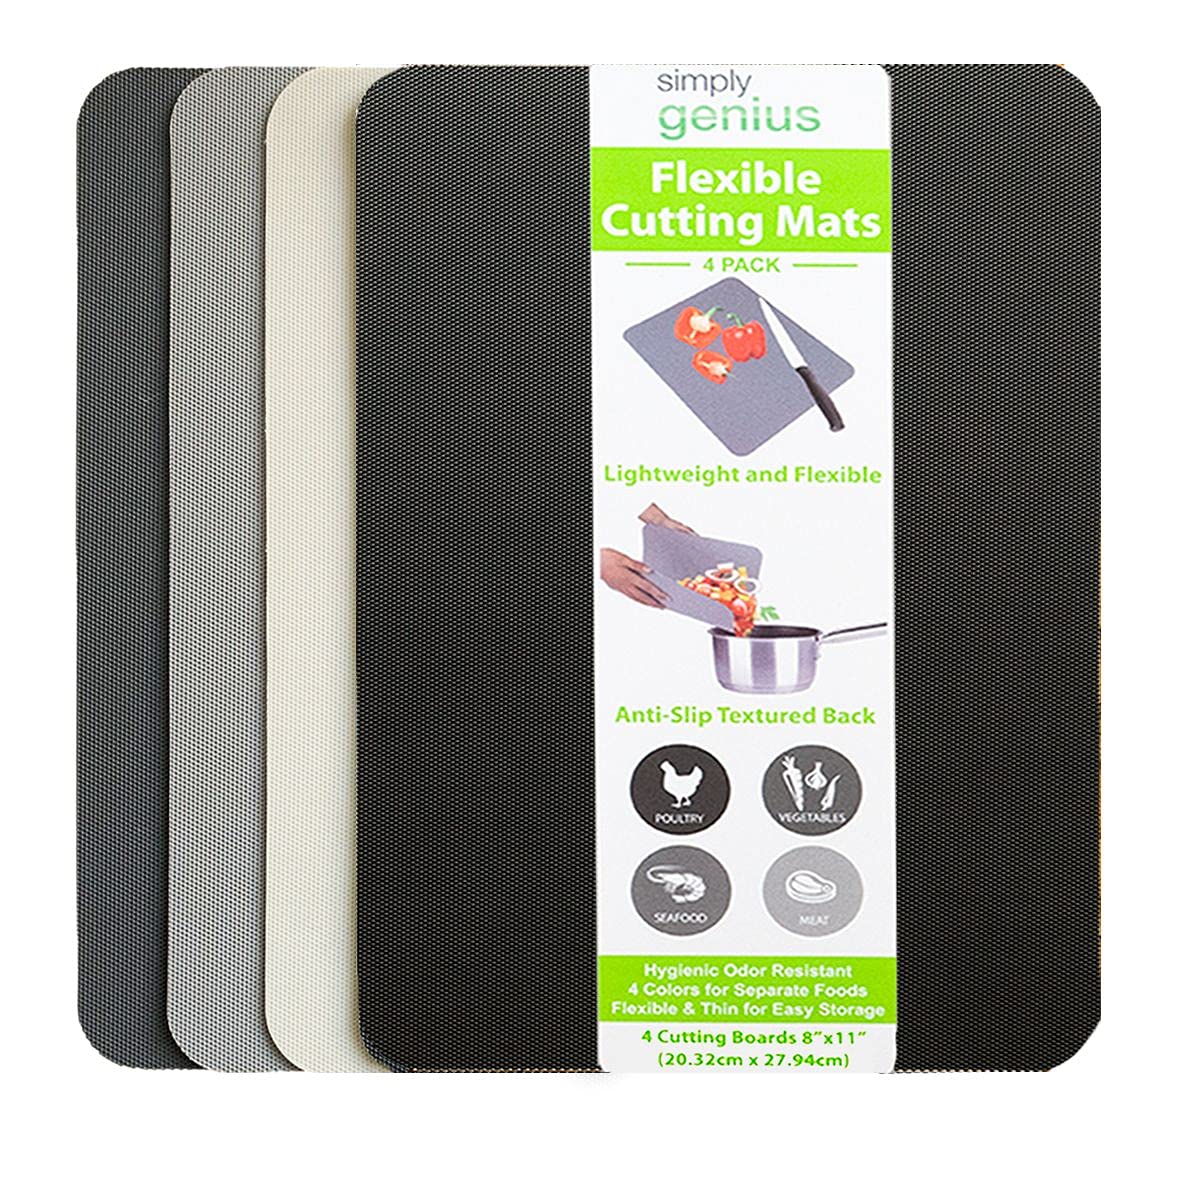 Simply genius (4 Piece) 8 x 11 Extra Thick Small cutting Boards for Kitchen Prep, Non Slip Flexible cutting Mats, Dishwasher Saf